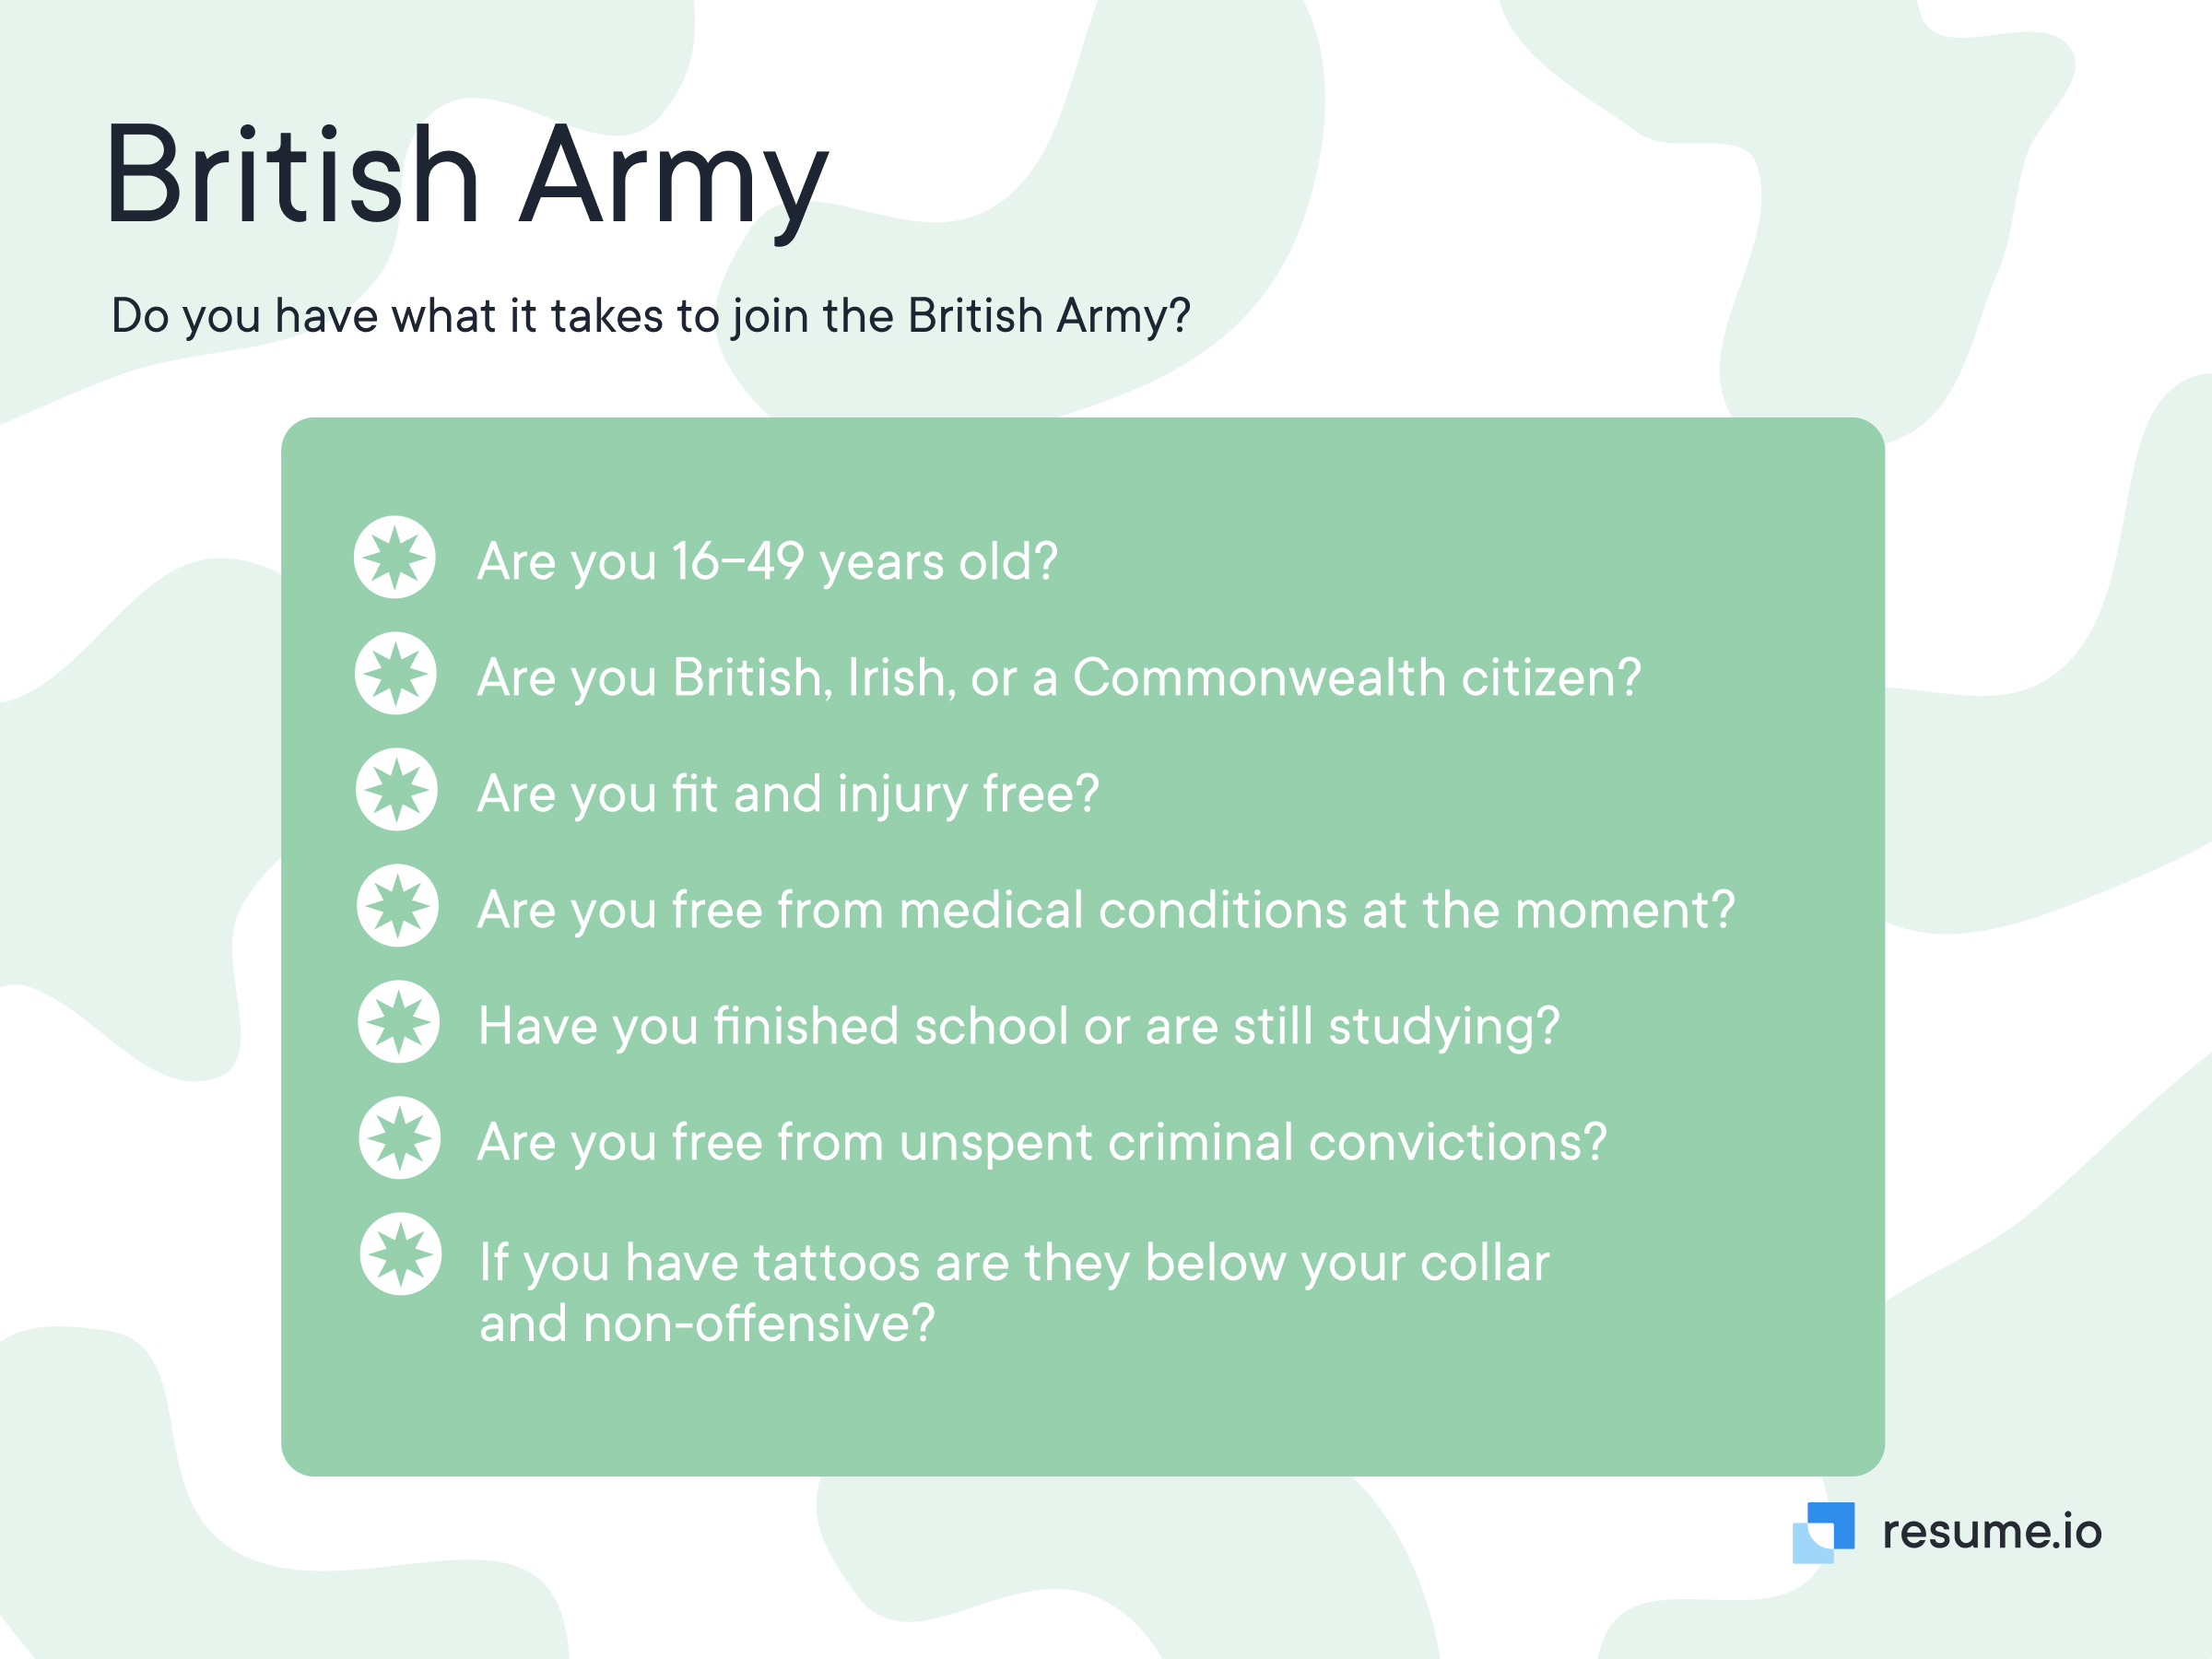 Do you have what it takes to join the British Army?